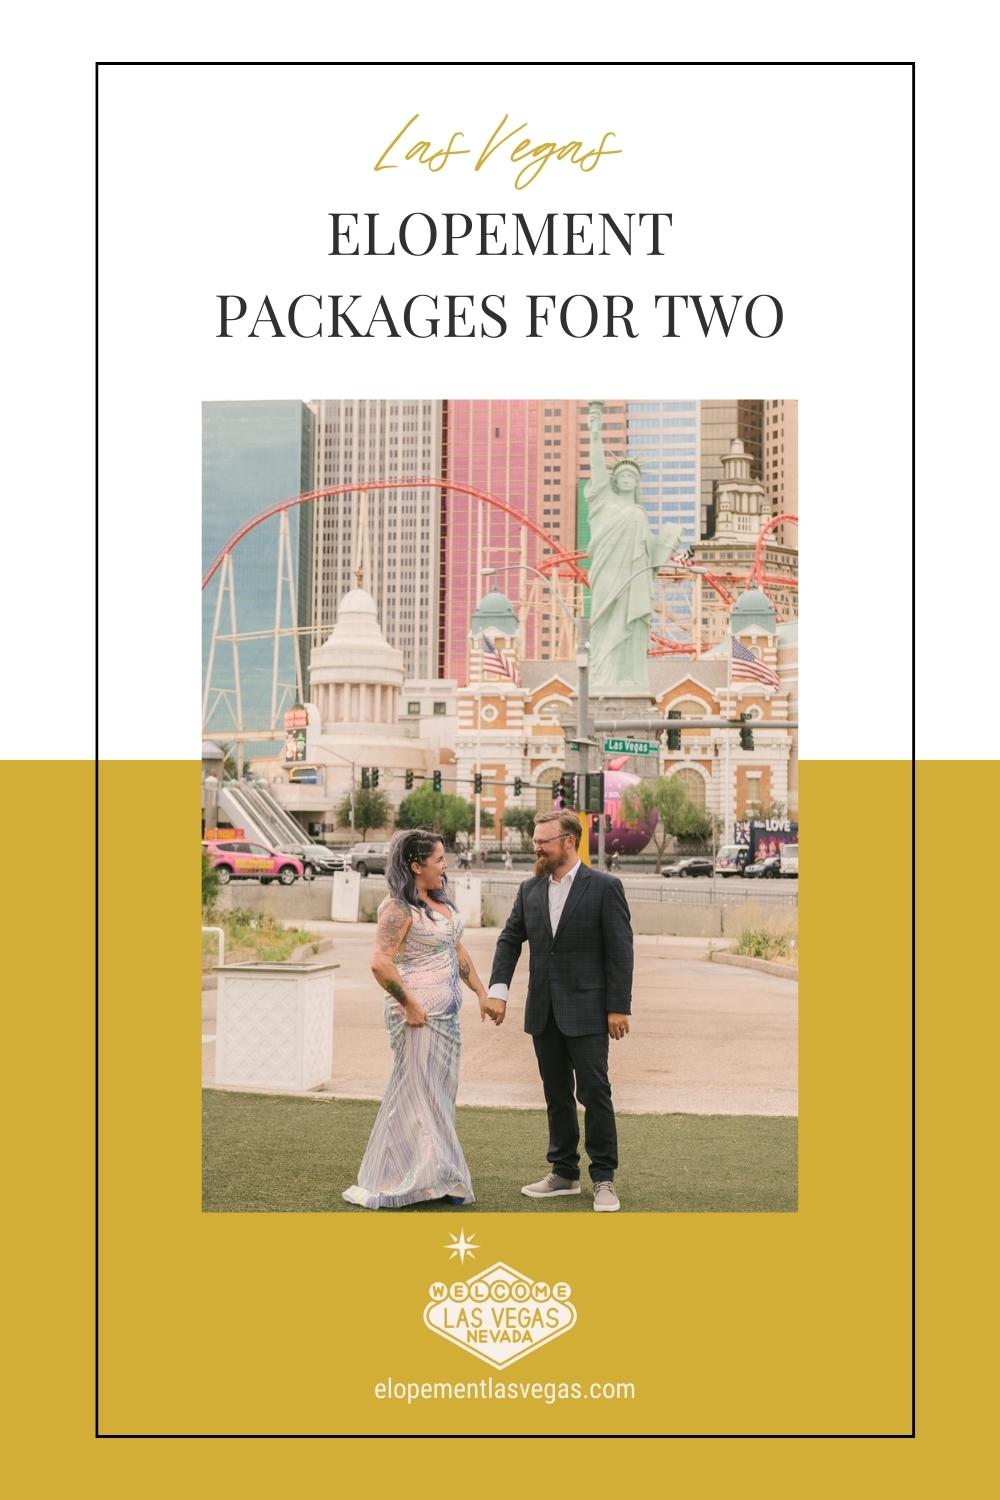 Newlywed couple holding hands and smiling at each other; image overlaid with text that reads La Vegas Elopement Packages For Two